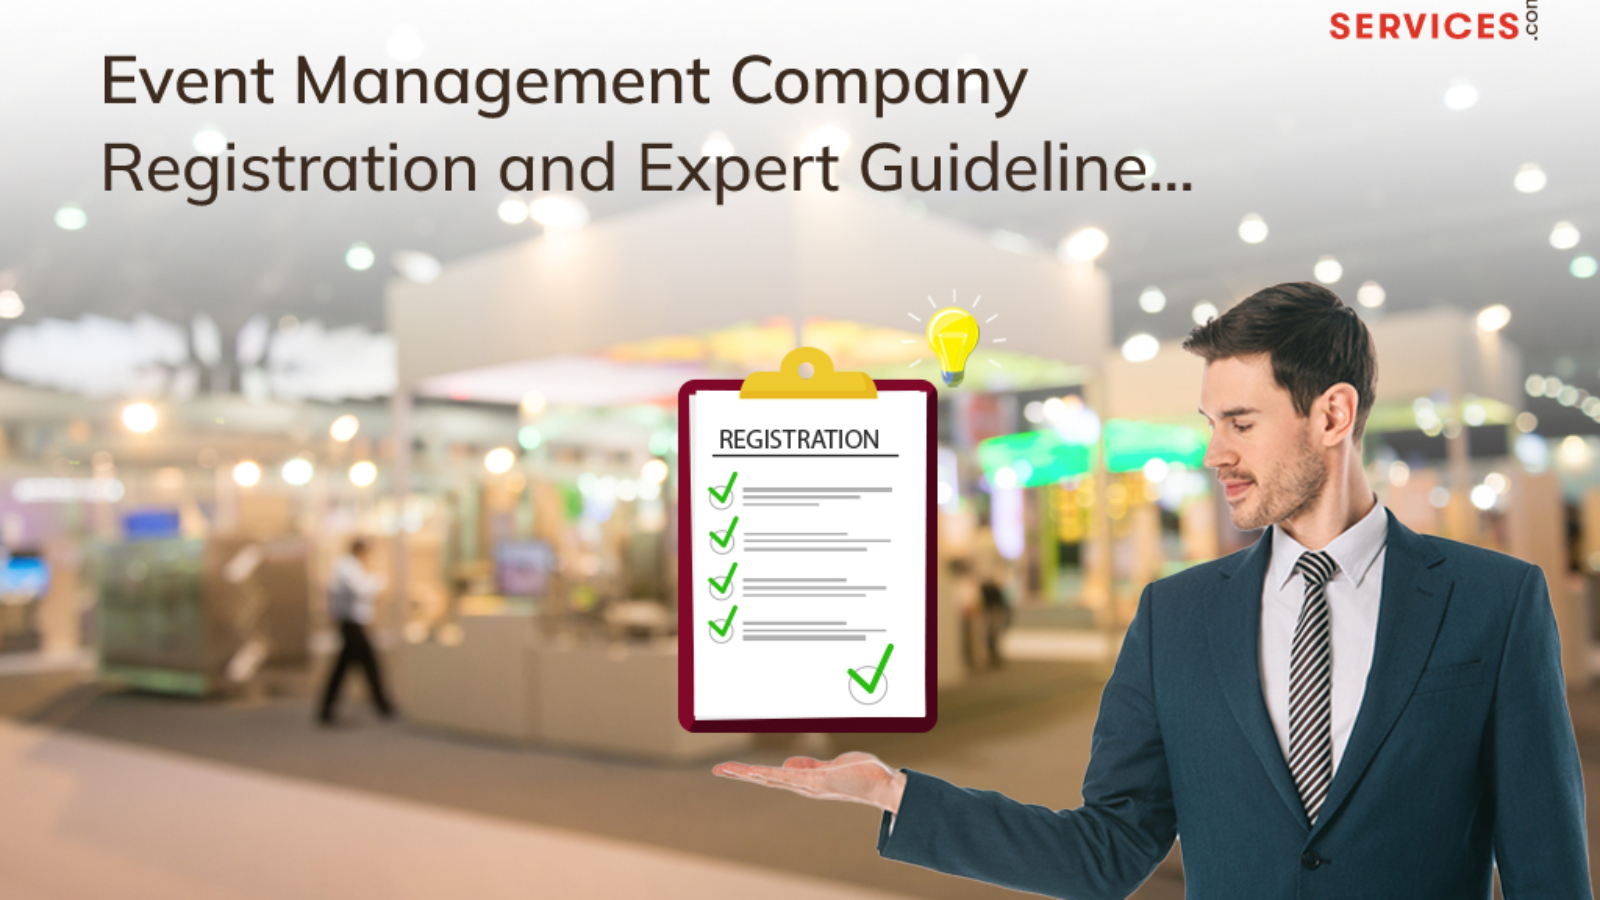 Event Management Company Registration And Expert Guideline